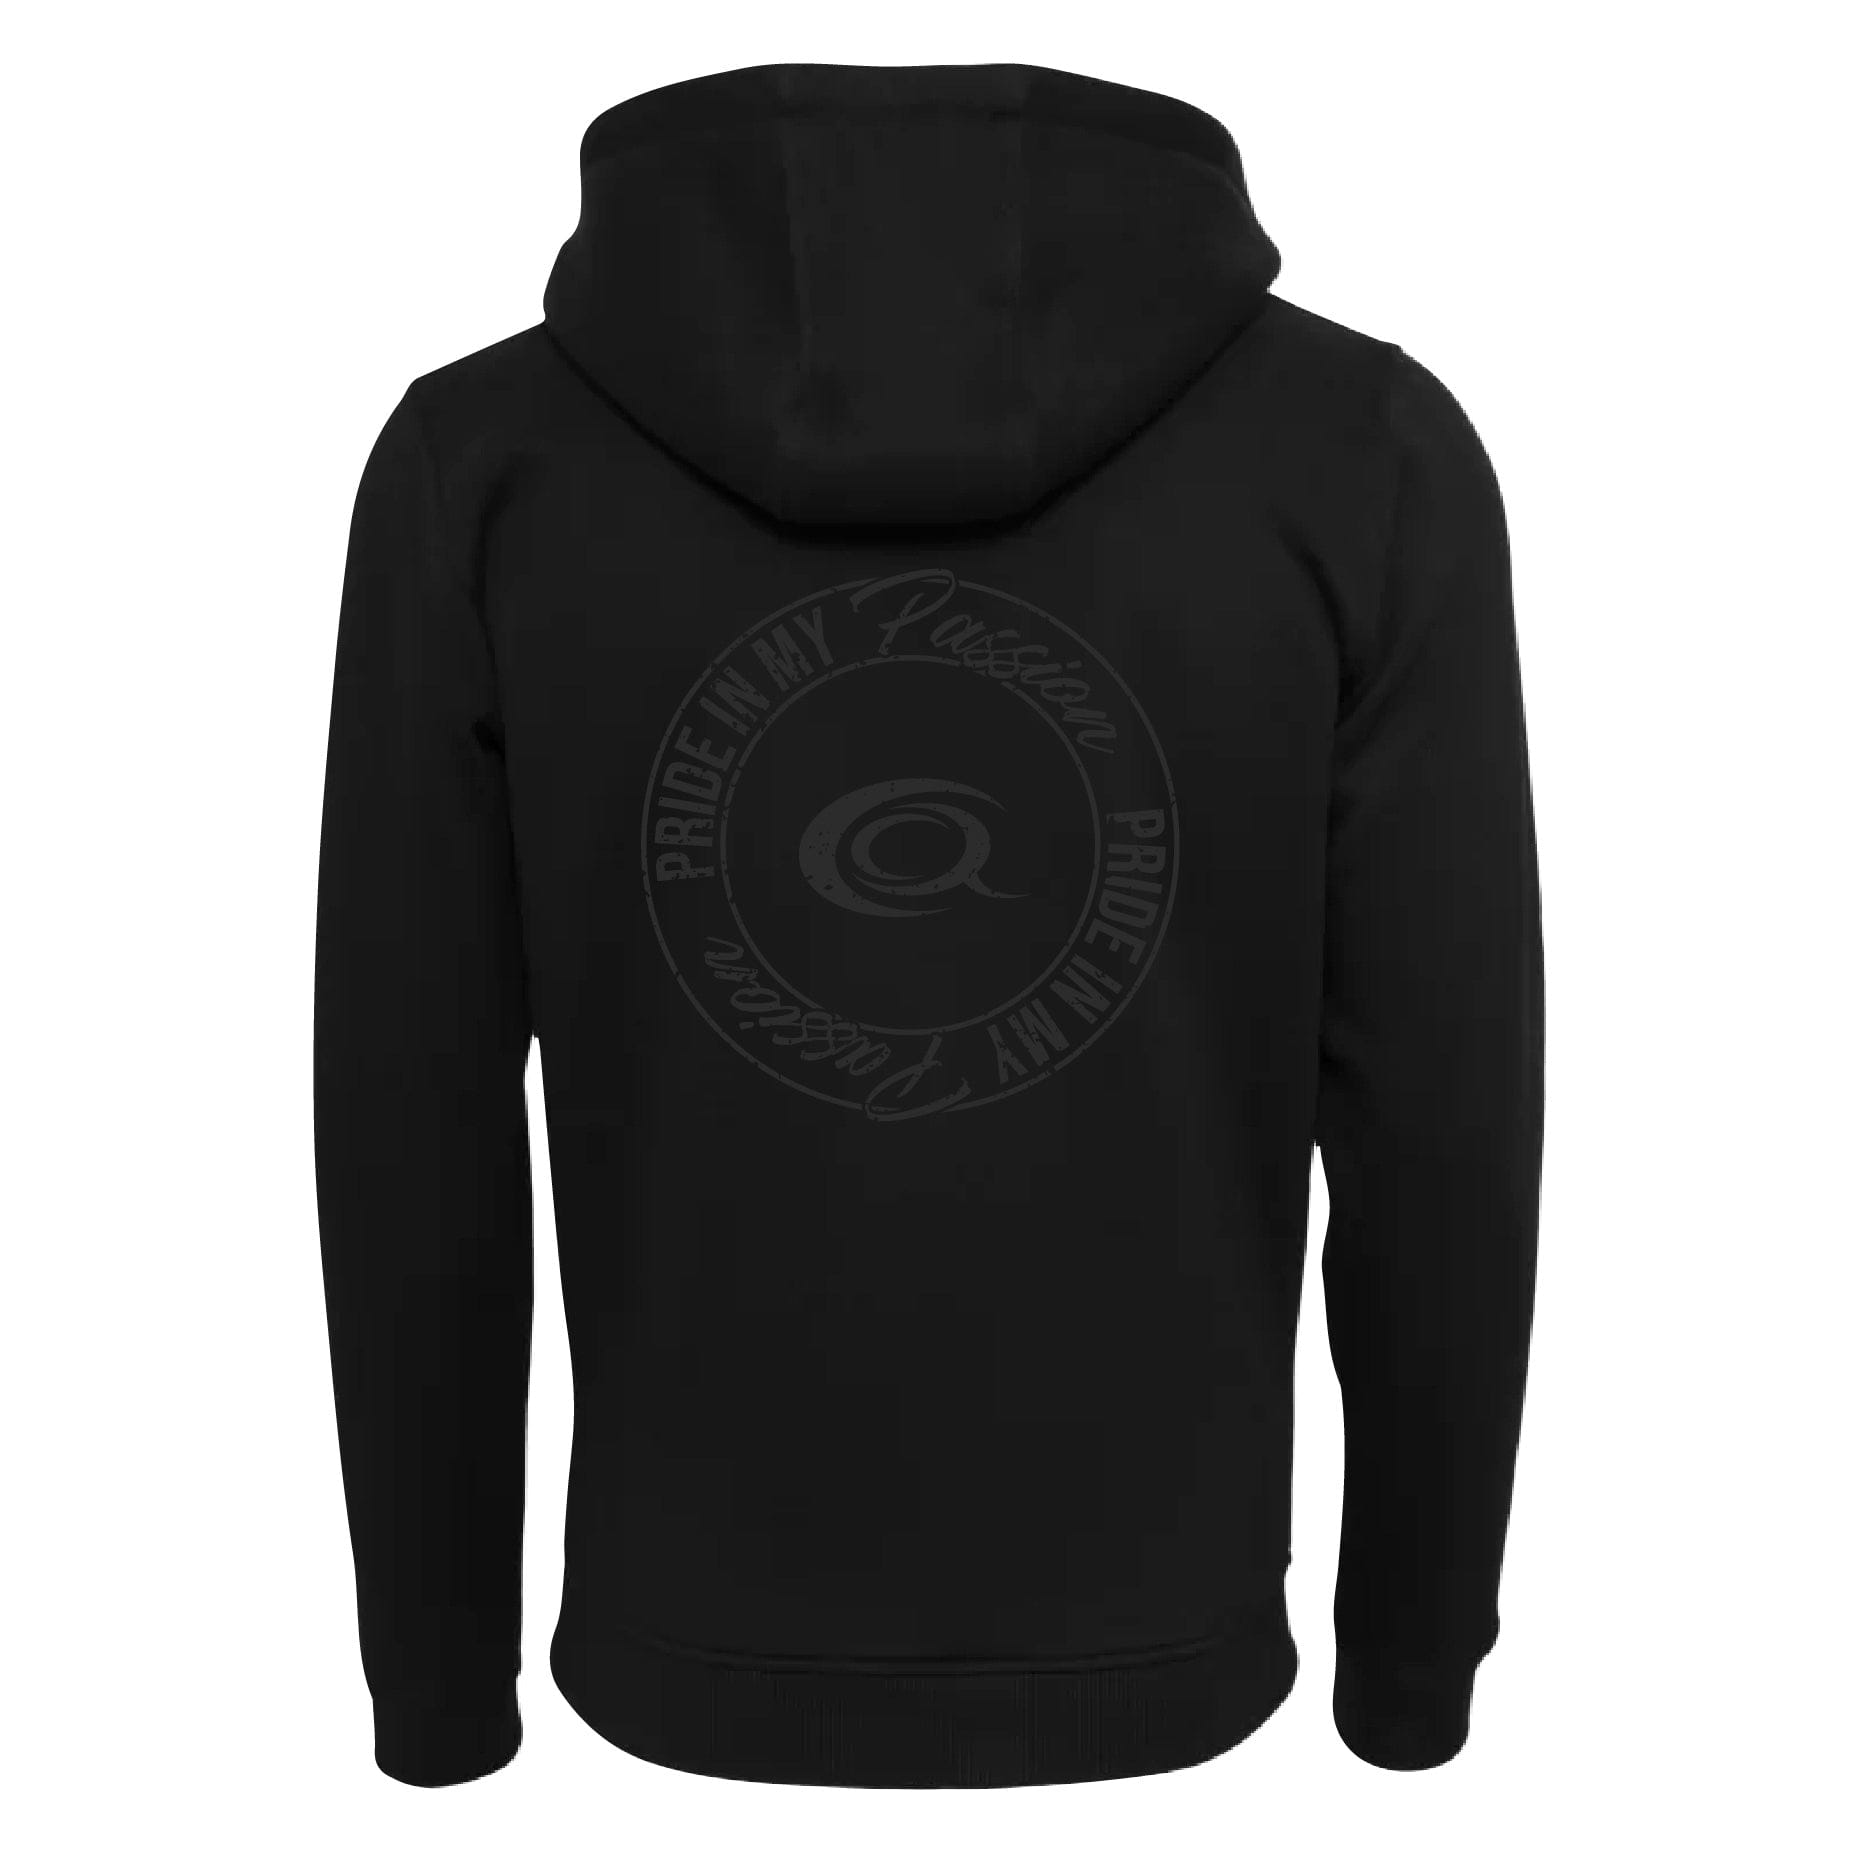 Zip Gym Hoodie with black on black print of controlled aggression logo and the pride in my passion emblem